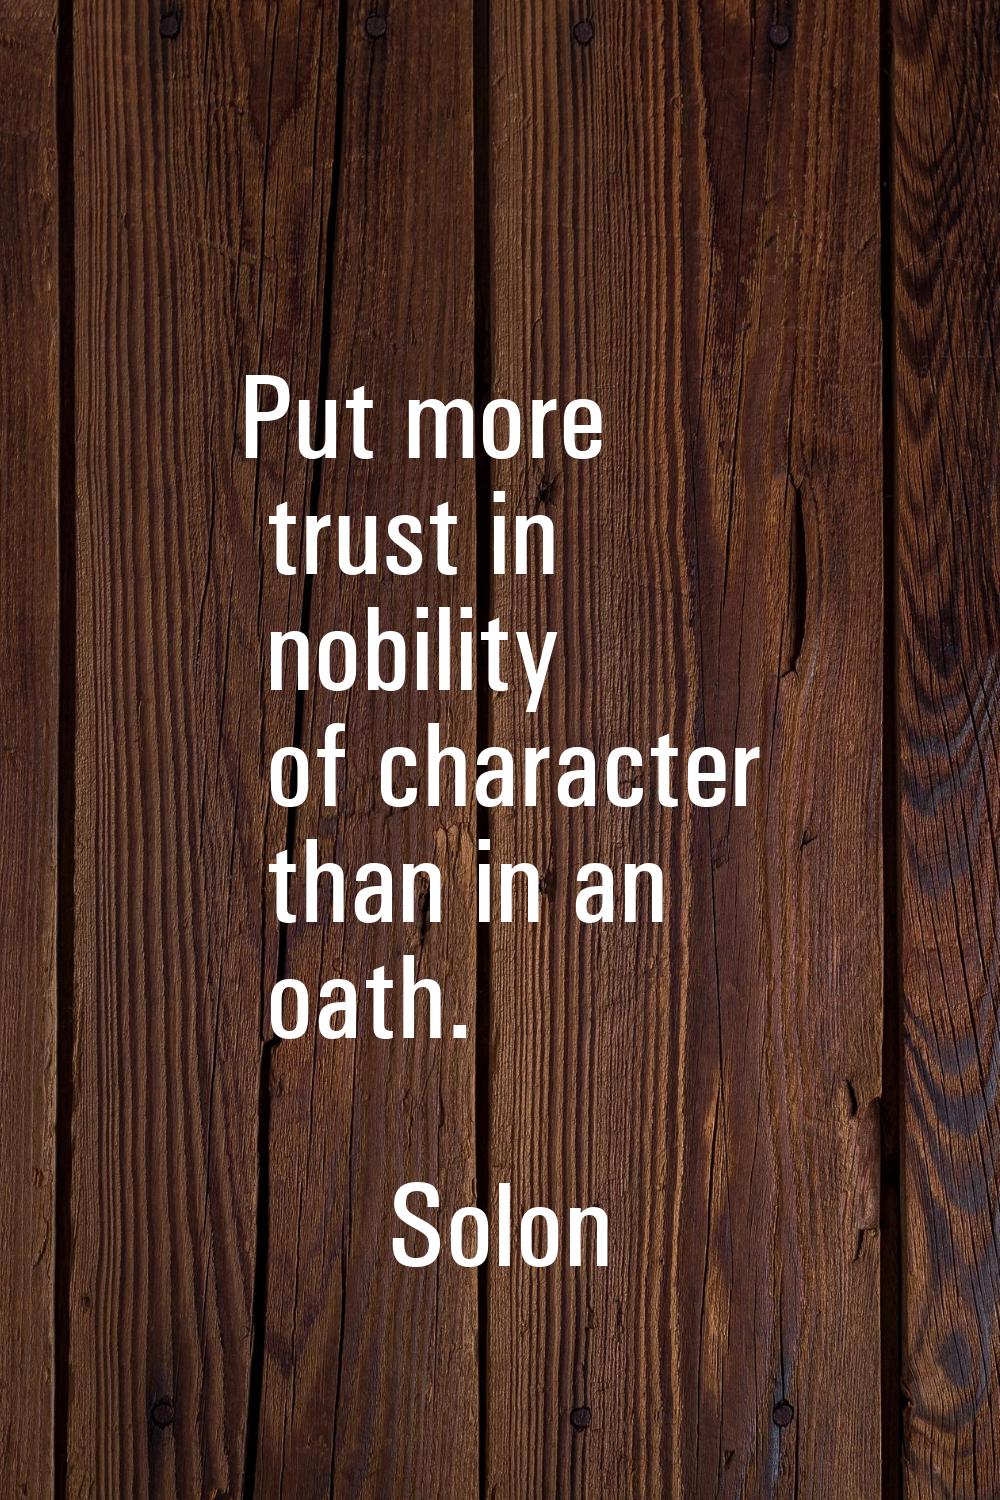 Put more trust in nobility of character than in an oath.